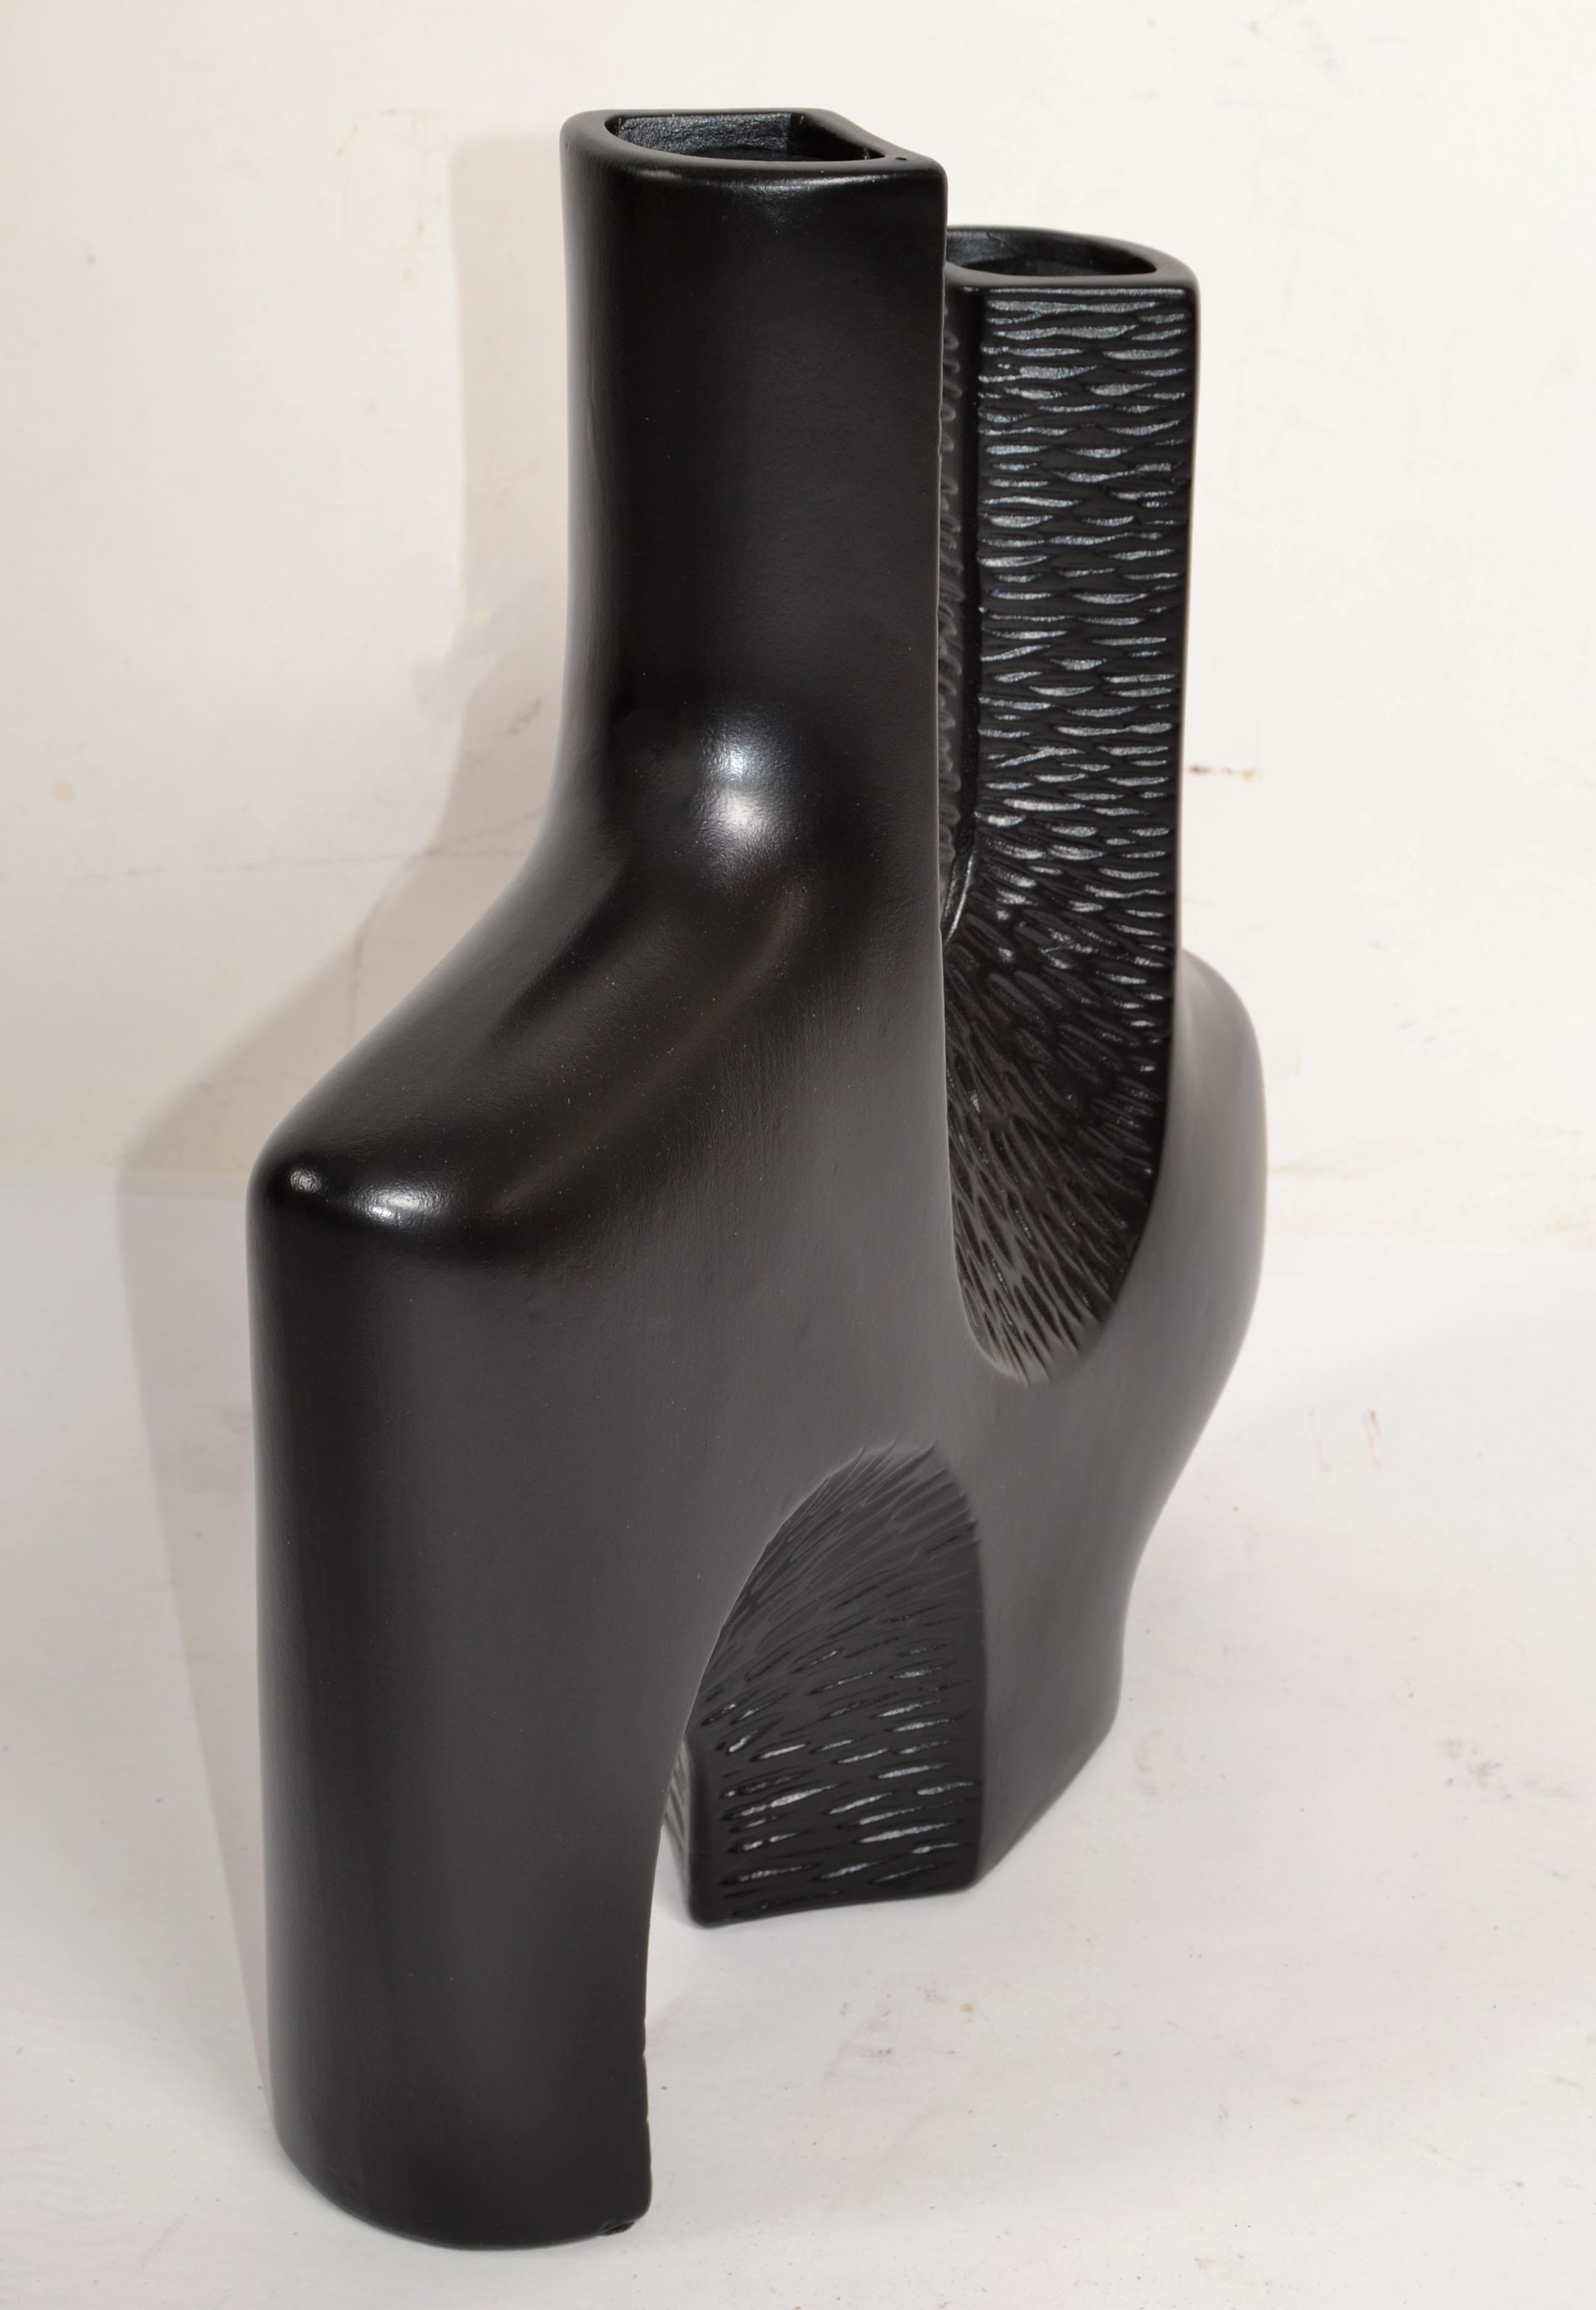 1980s Abstract Textured Two Neck Vase Vessel Black Finish Mid-Century Modern For Sale 3